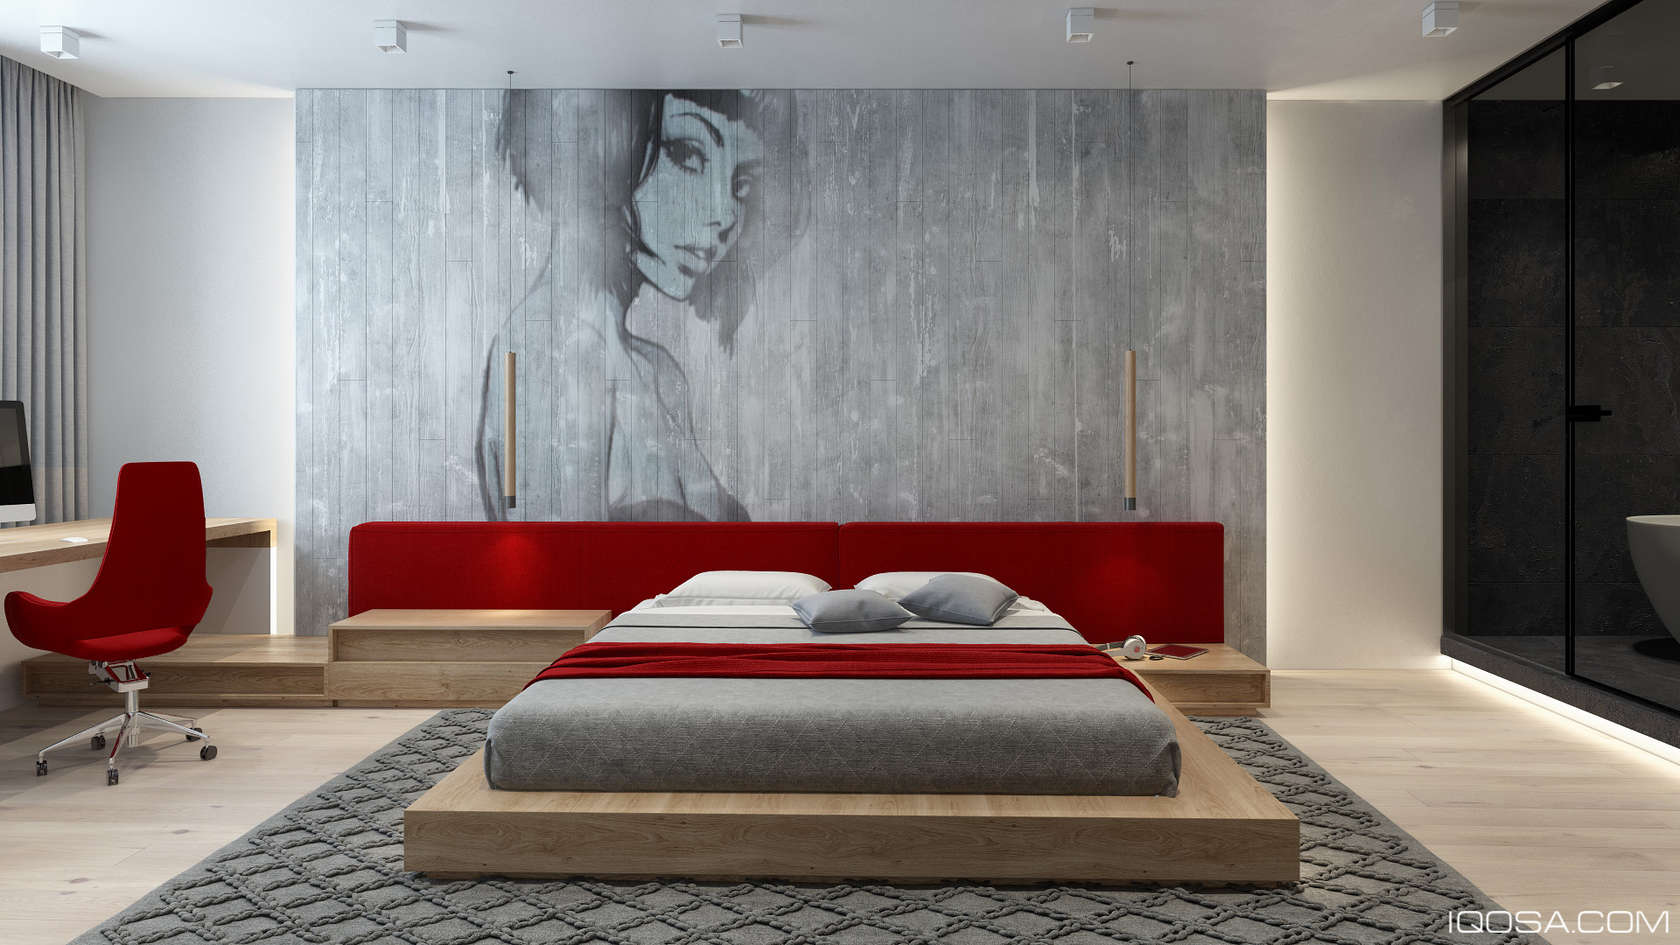 Wall art bedroom decoration "width =" 1680 "height =" 945 "srcset =" https://mileray.com/wp-content/uploads/2020/05/1588509625_327_Luxury-Bedroom-Design-Ideas-With-a-Awesome-Wall-Decoration-Will.jpg 1680w, https://mileray.com/wp -content / uploads / 2016/09 / Iqosa-300x169.jpg 300w, https://mileray.com/wp-content/uploads/2016/09/Iqosa-768x432.jpg 768w, https://mileray.com/wp -content / uploads / 2016/09 / Iqosa-1024x576.jpg 1024w, https://mileray.com/wp-content/uploads/2016/09/Iqosa-696x392.jpg 696w, https://mileray.com/wp -content / uploads / 2016/09 / Iqosa-1068x601.jpg 1068w, https://mileray.com/wp-content/uploads/2016/09/Iqosa-747x420.jpg 747w "sizes =" (maximum width: 1680px) 100vw, 1680px